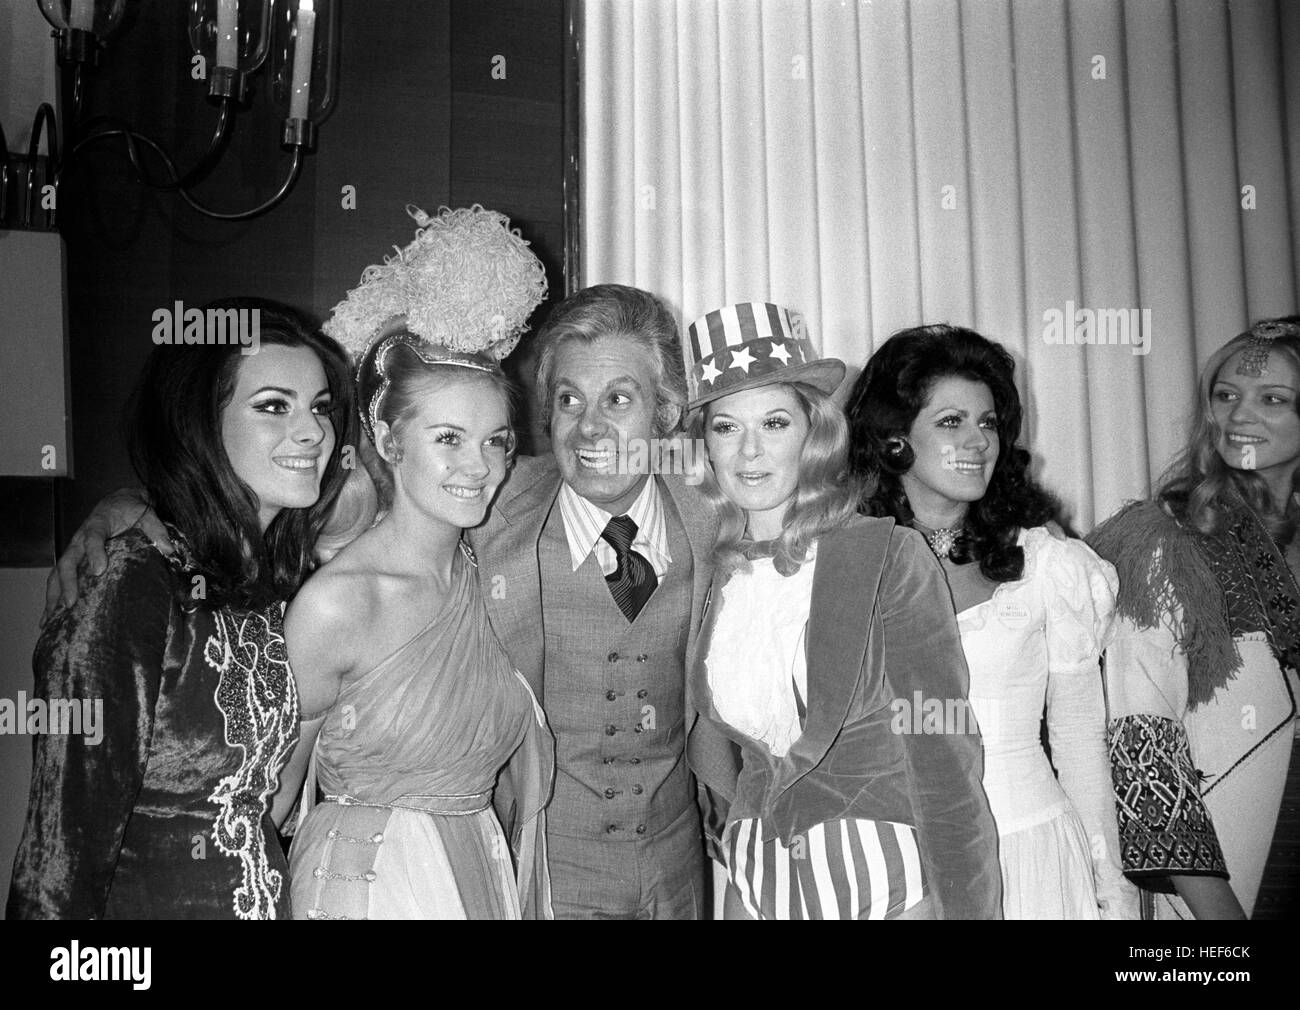 Female impersonator, Danny La Rue, shed his drag image to meet the contestants of the Miss World 1970 contest in London. Mr La Rue (centre) poses with the Miss World contestants (l-r) Afet Tugbay (Miss Turkey), Yvonne Anne Ormes (Miss UK), Sandra Anne Wolsfeld (Miss USA) and Tomasa Nina de las Casas Mata (Miss Venezuela). The meeting took place at the Variety Club of Great Britain Savoy Hotel Luncheon, in honour of the contestants who wore national dress for the occasion. Stock Photo